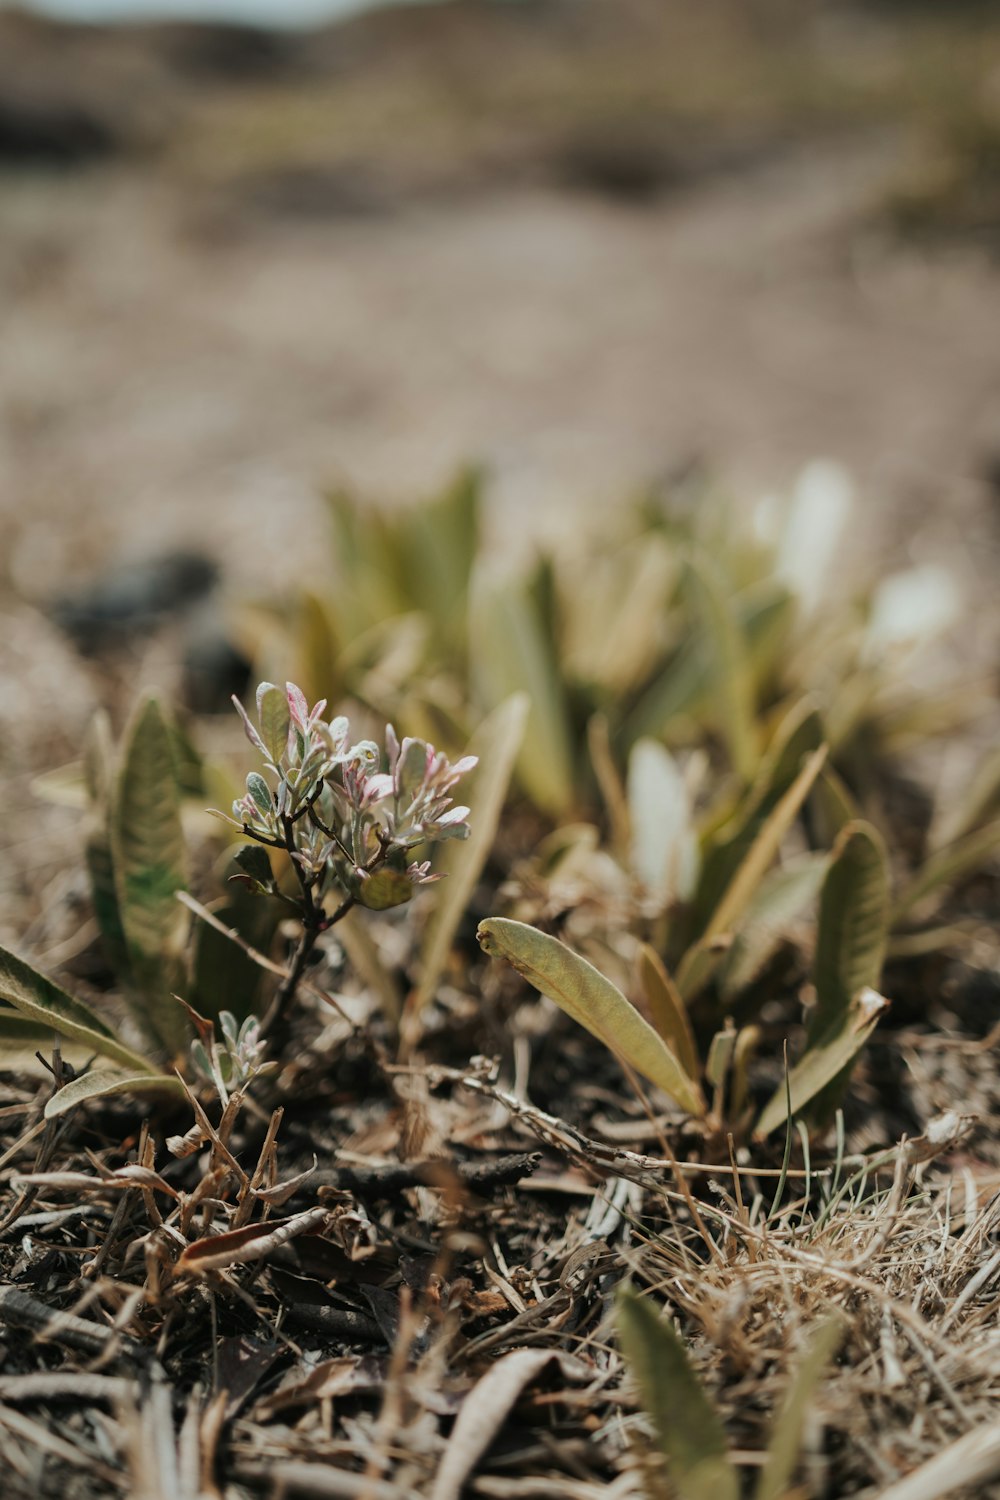 a close up of a small plant in the dirt